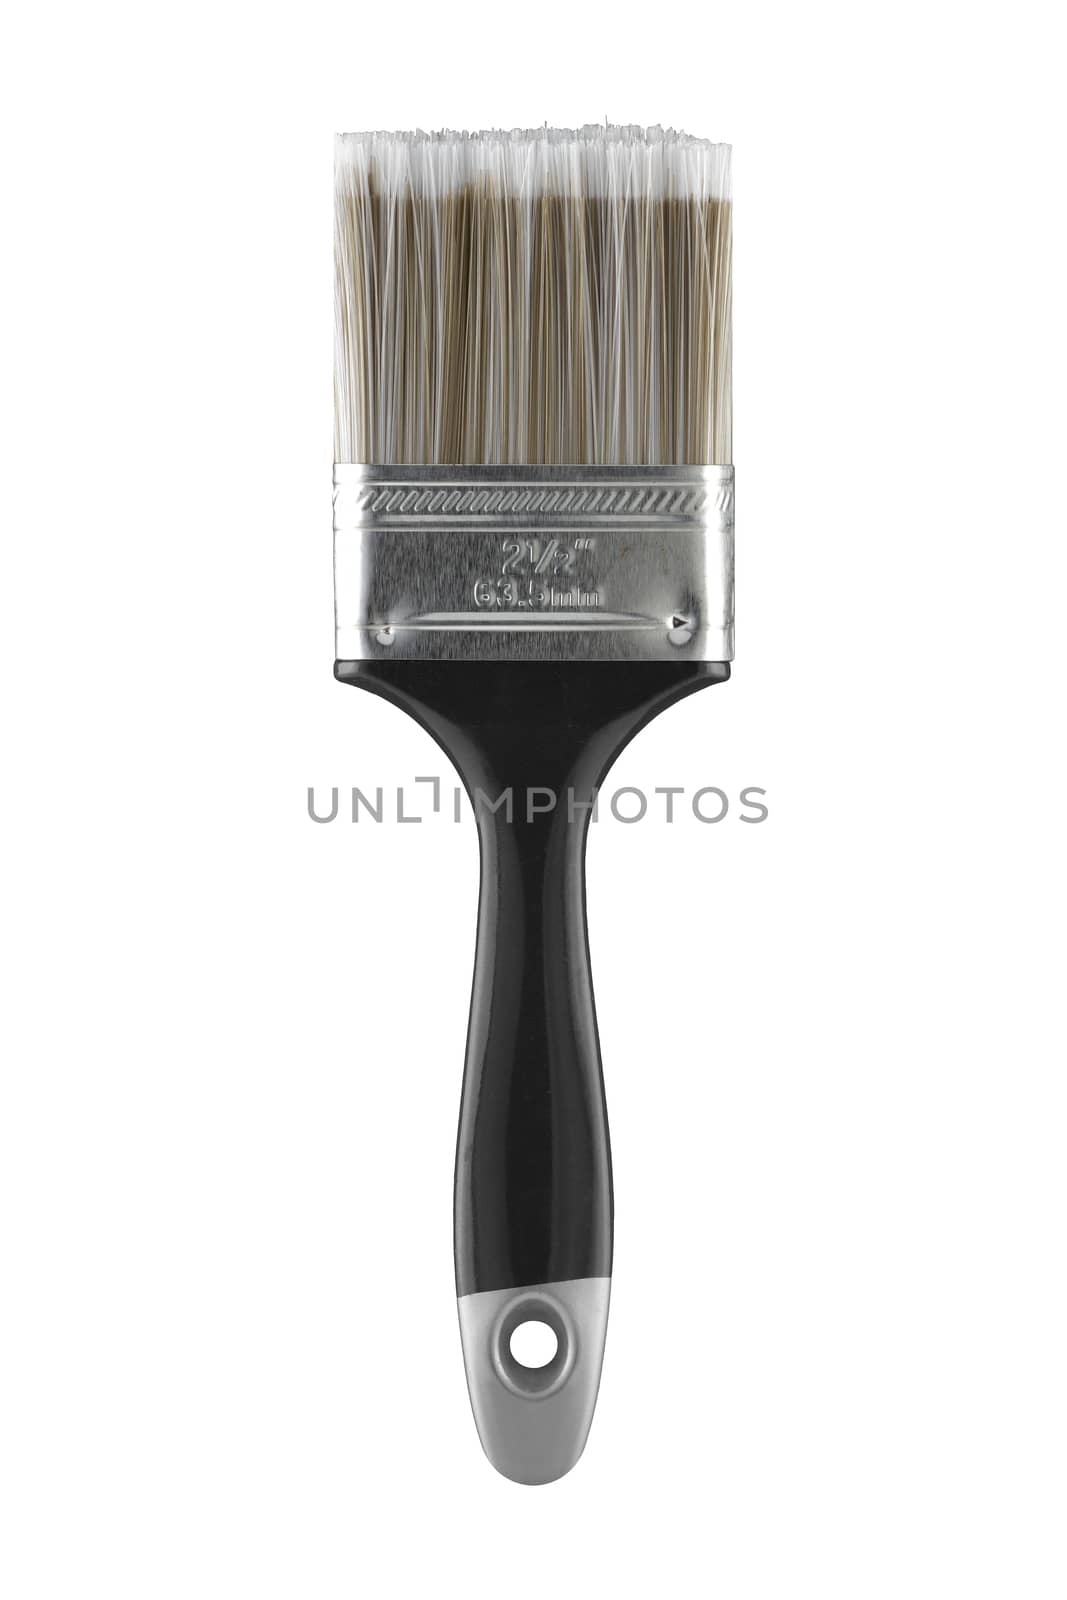 A 2 1/2" 63.5mm two and a half inch decorators paint brush on white with clipping path